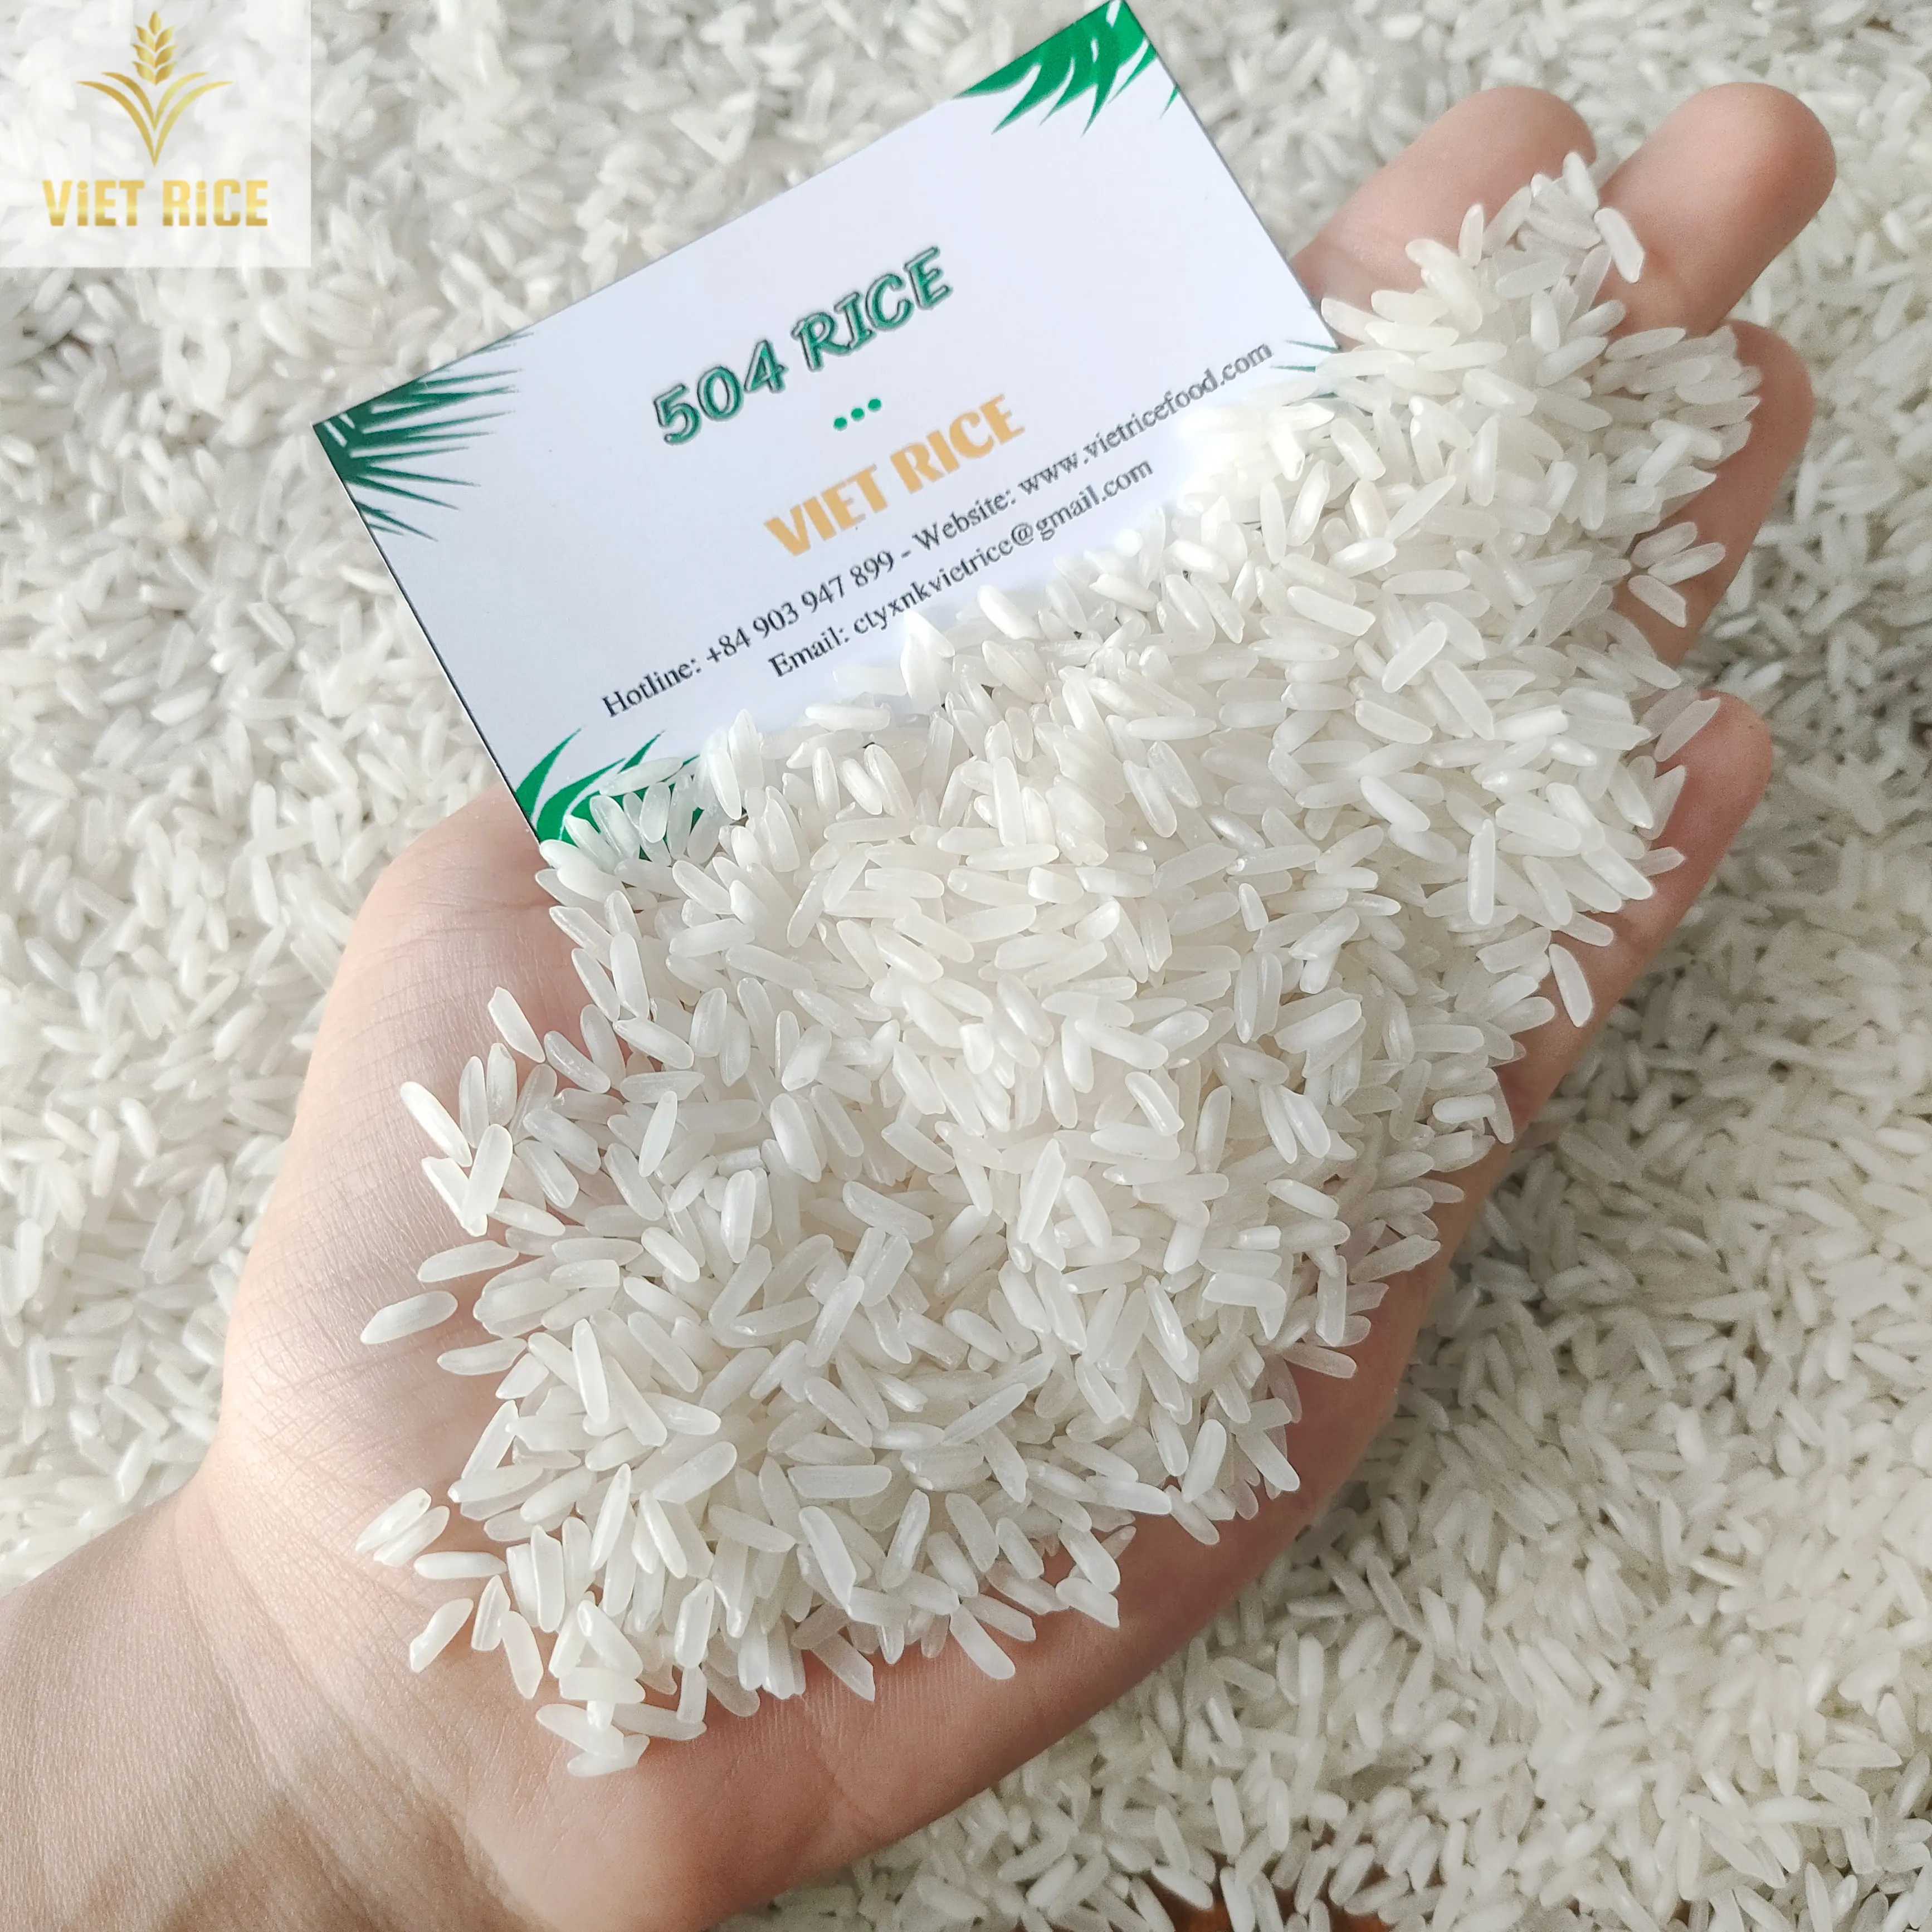 Vietnamese Rice (Best Supplier, 504 RICE) Both domestically, internationally white rice of superior quality and quantity is sold